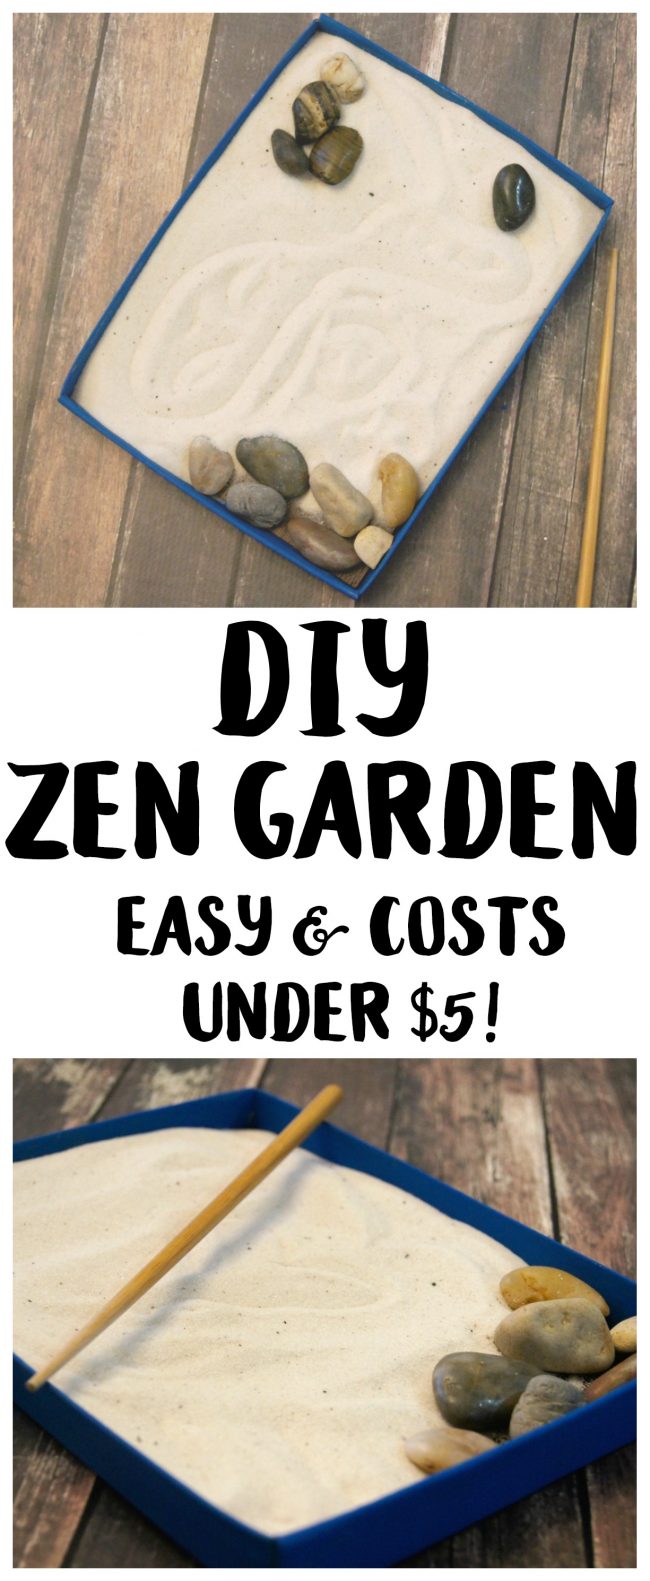 Zen gardens are beautiful places for meditation and to get new ideas- but not everyone has room in their backyard for a dedicated zen zone {not to mention the weather isn’t always cooperative!} Bring the zen garden indoors with this super easy upcycled craft idea! Make a miniature desktop DIY sand Zen Garden using mostly materials you have at home {this craft costs under $5 to make!} This project can even function as home décor and even as a fidget tool.